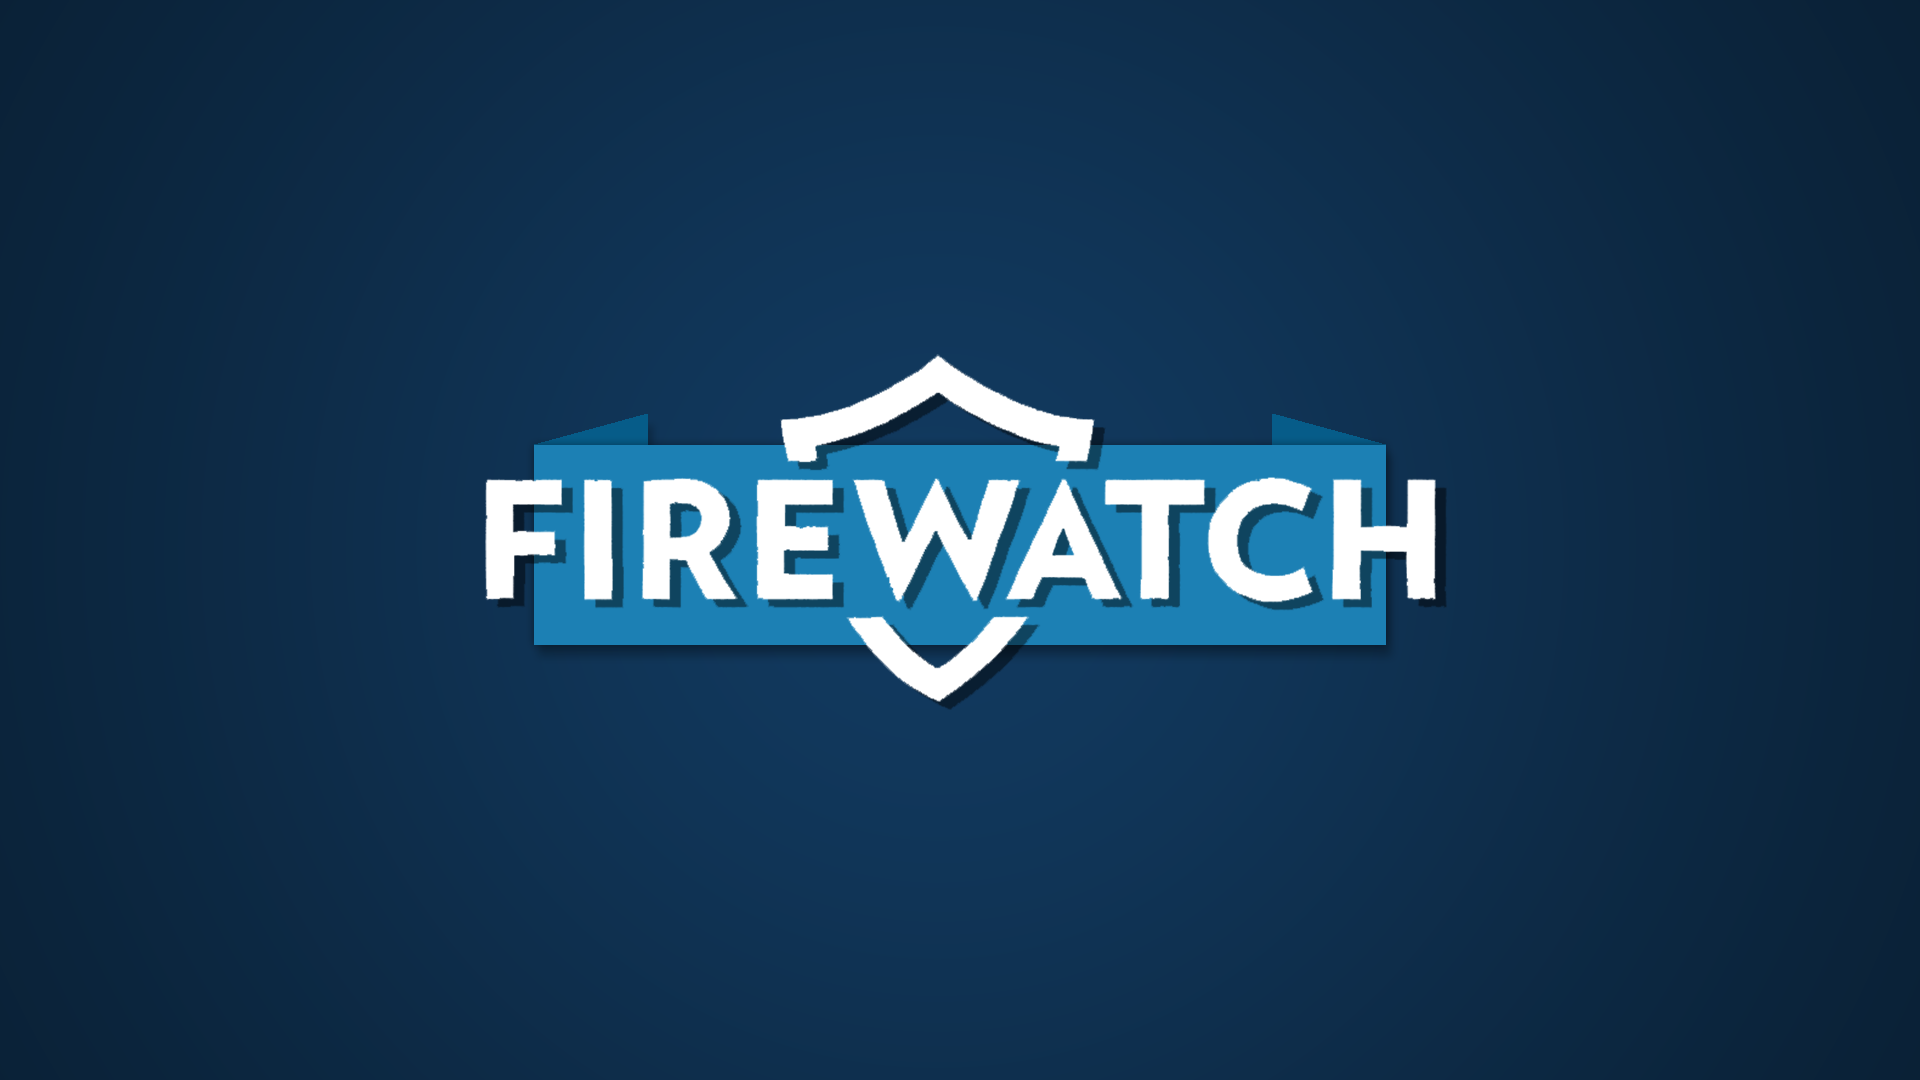 General 1920x1080 Firewatch typography blue background video games PC gaming